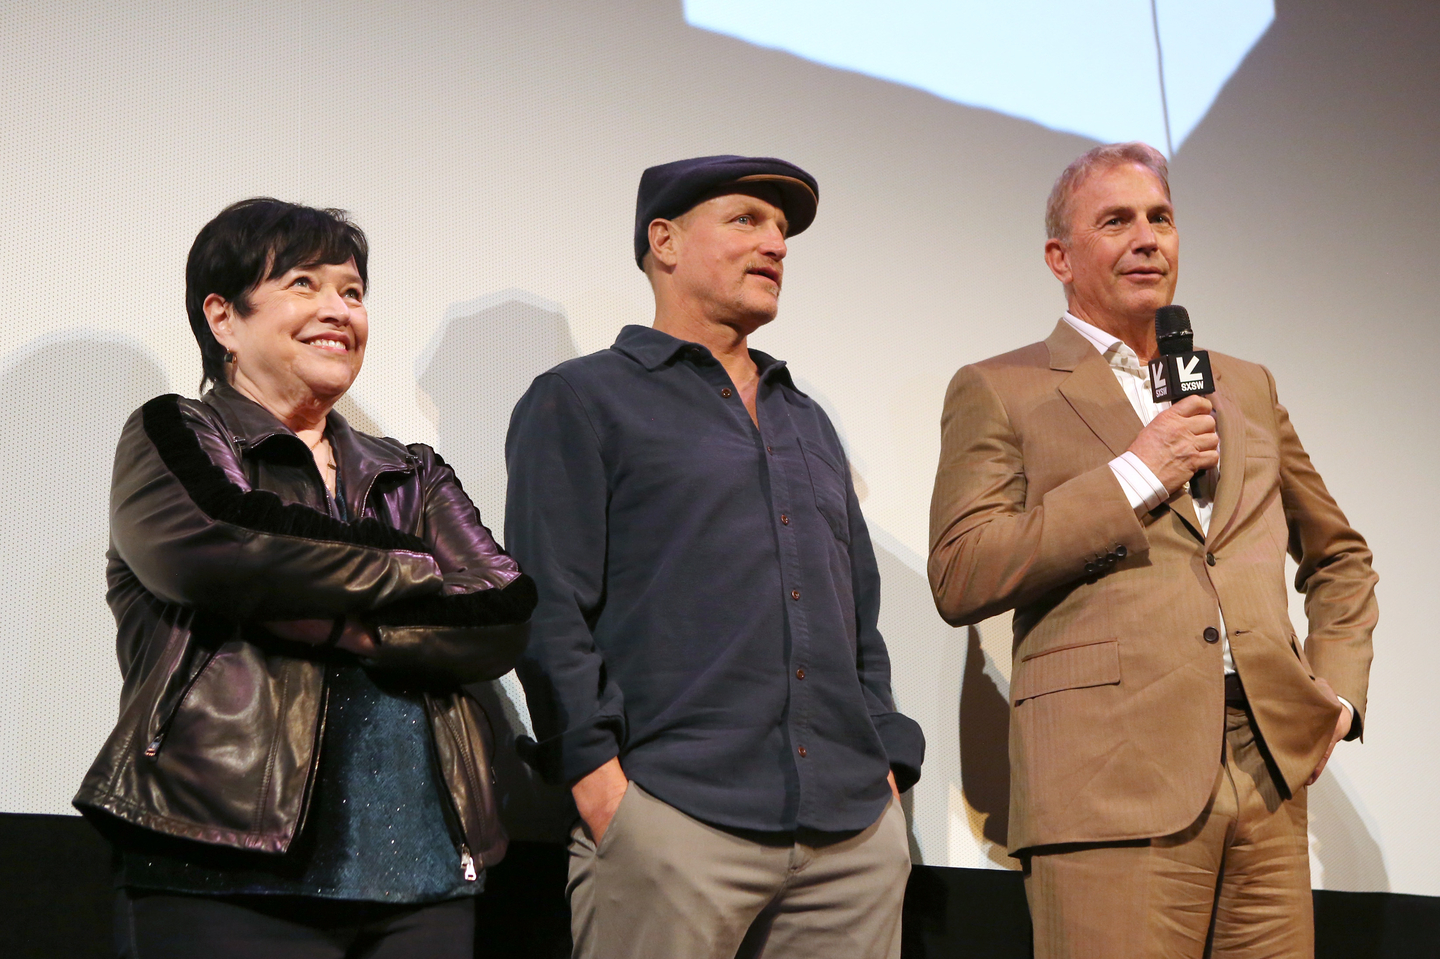 (L-R) Kathy Bates, Woody Harrelson, and Kevin Costner speak onstage at The Highwaymen Premiere at the Paramount Theatre.